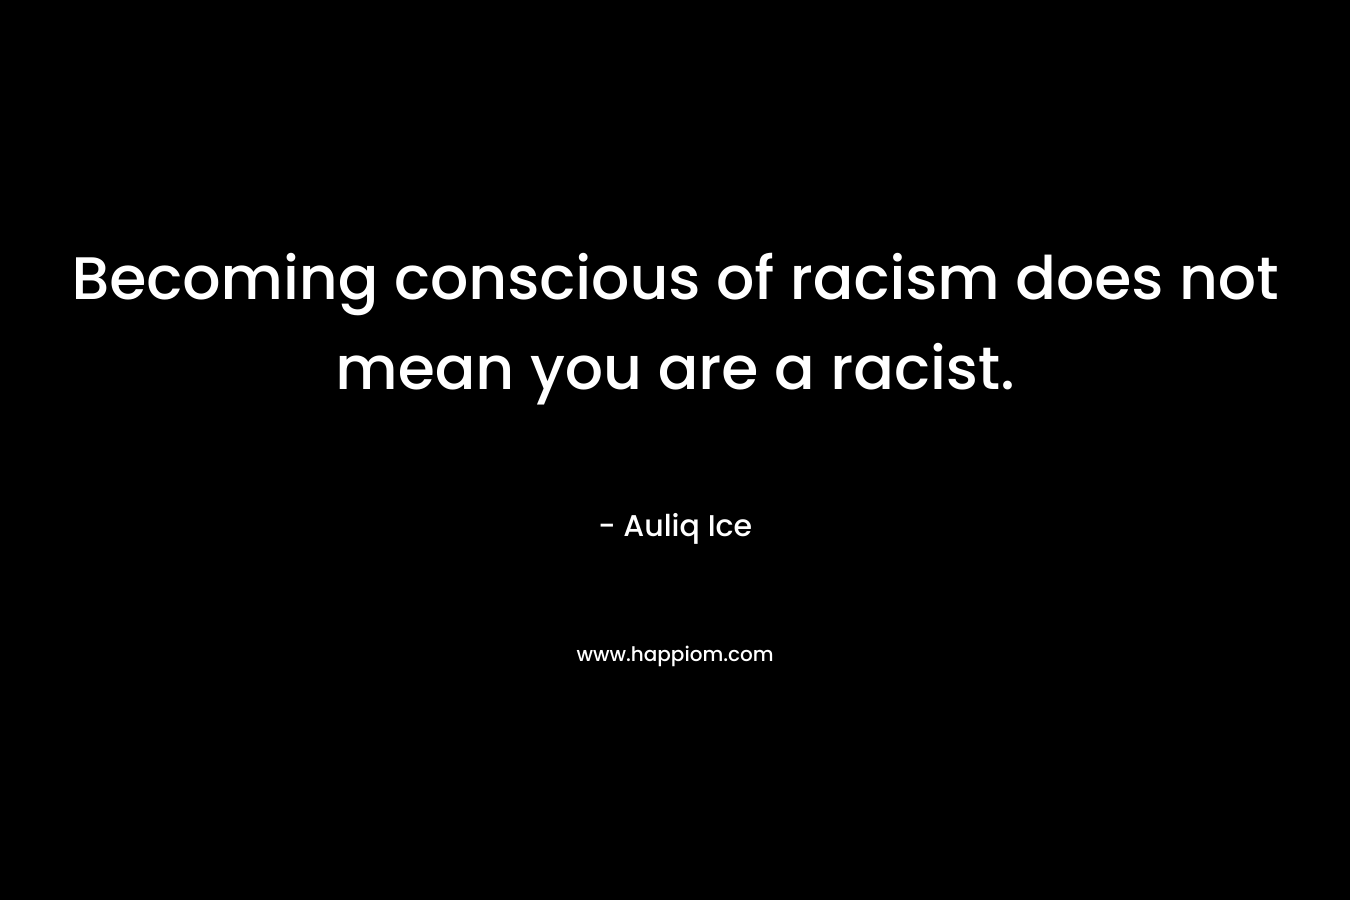 Becoming conscious of racism does not mean you are a racist. – Auliq Ice